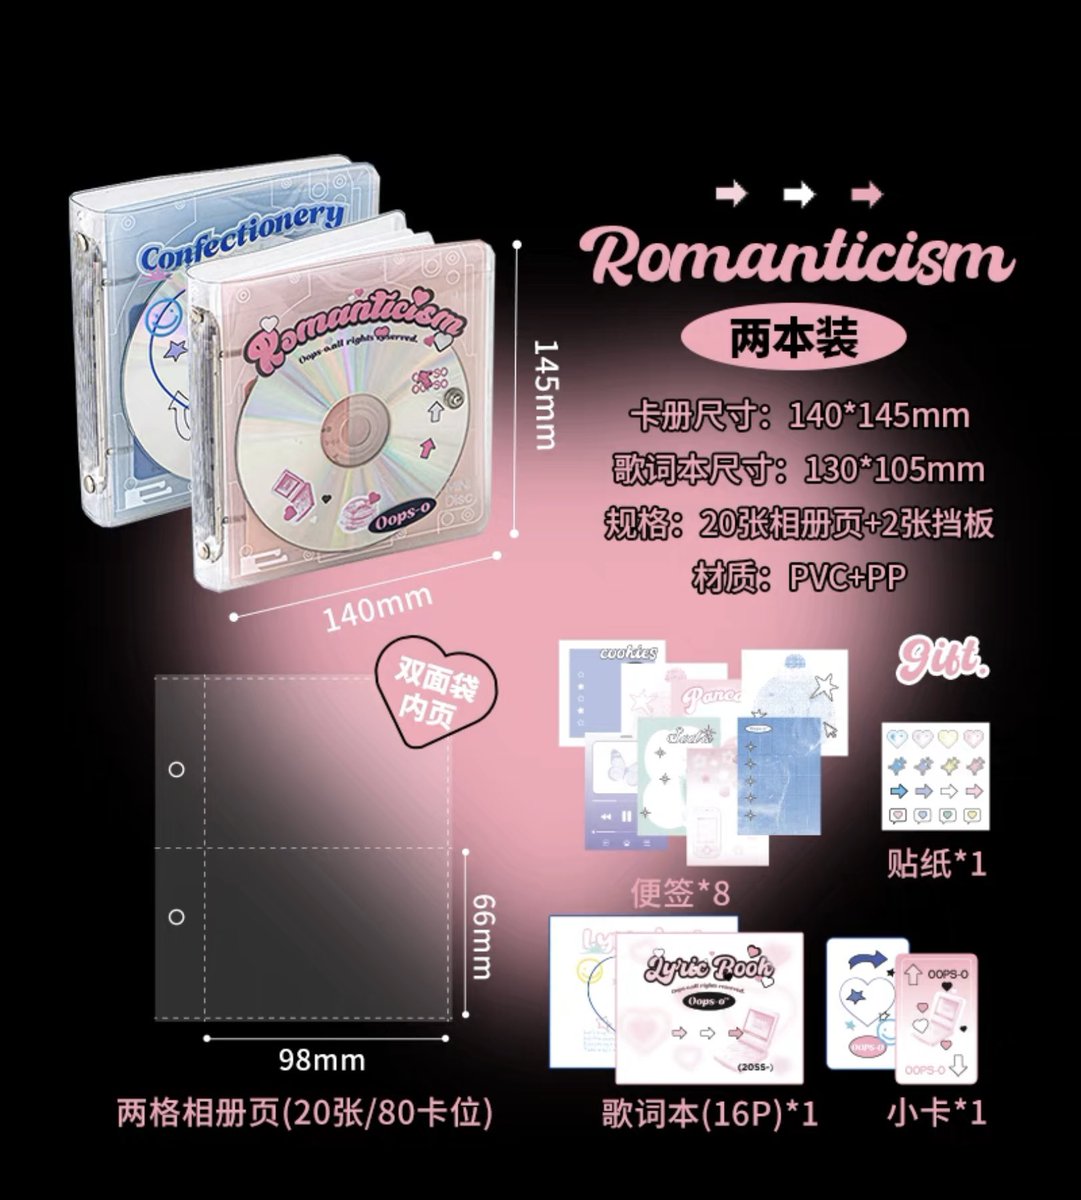 Collect Book 2p
‘ Oops-o Retro American Collect Book ’

Confectionery / Romanticism
🏷️ 66,378 each

Set of Two (Confectionery x2 / Romanticism x2 / Mixed x2)
🏷️ 118,770

🚛 Free onglok CN
❌ EMSTAX
🗓️ 20.06.23 (last day to order)